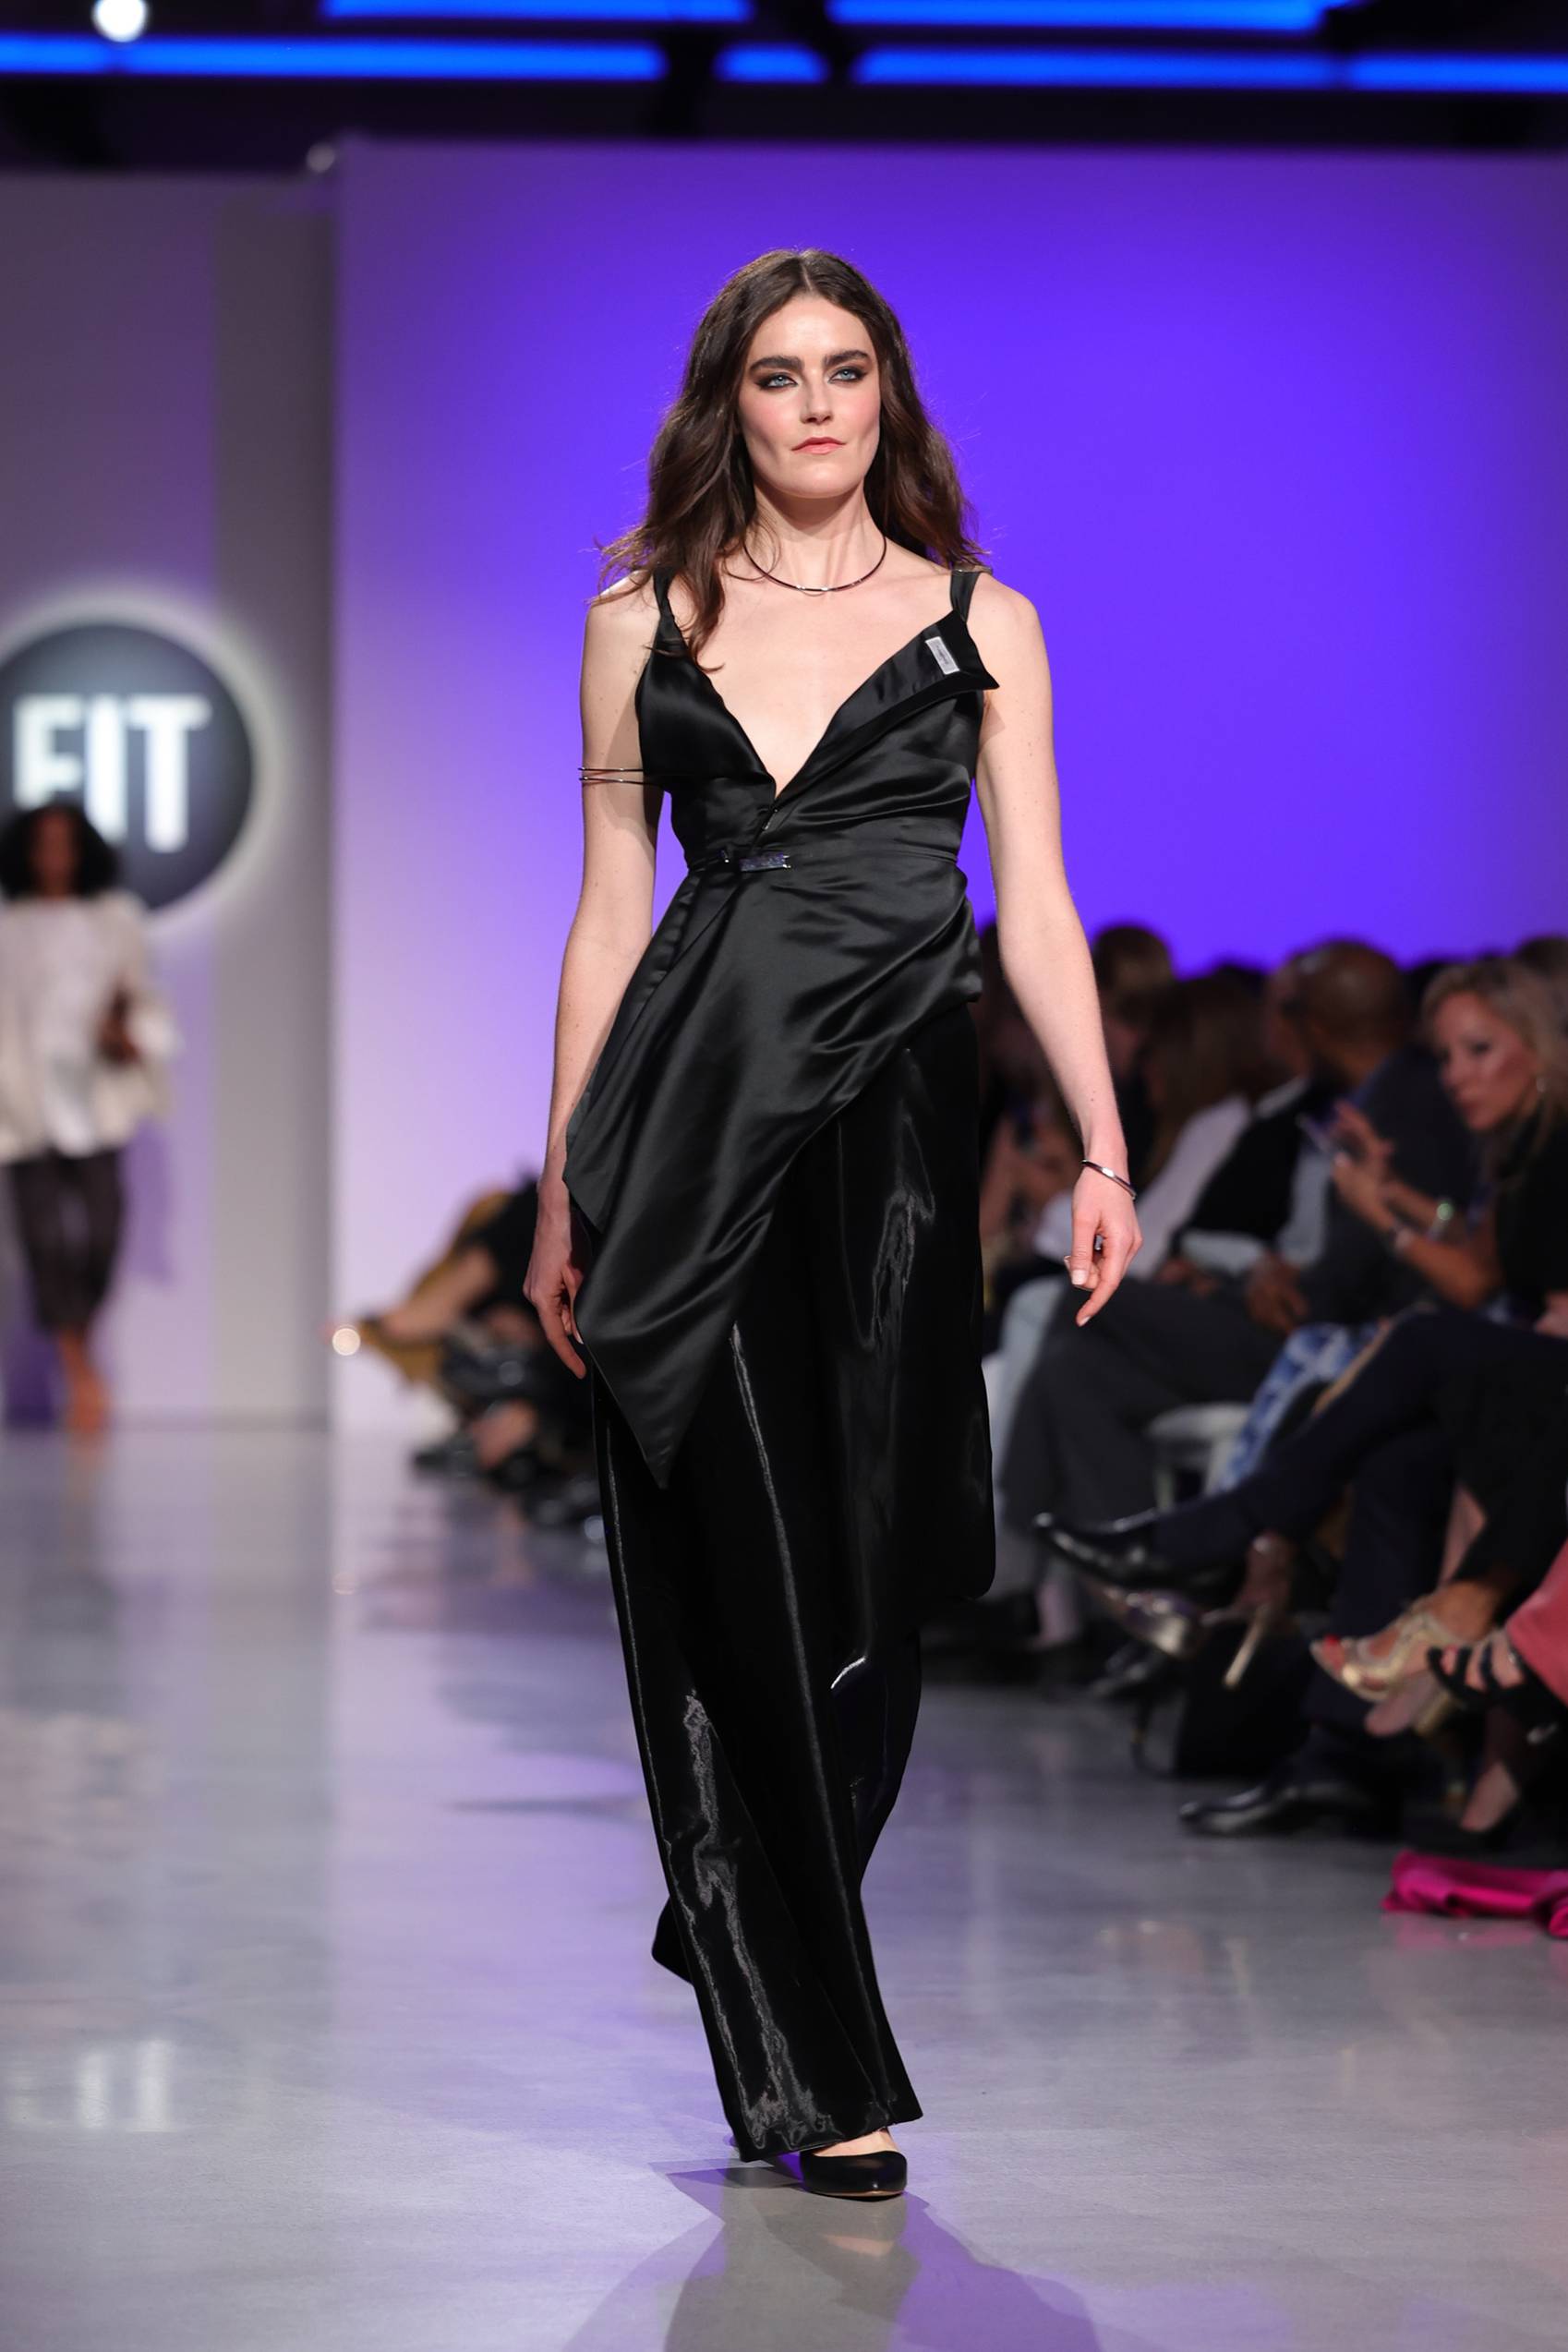 FASHION INSTITUTE OF TECHNOLOGY (FIT) CLASS24